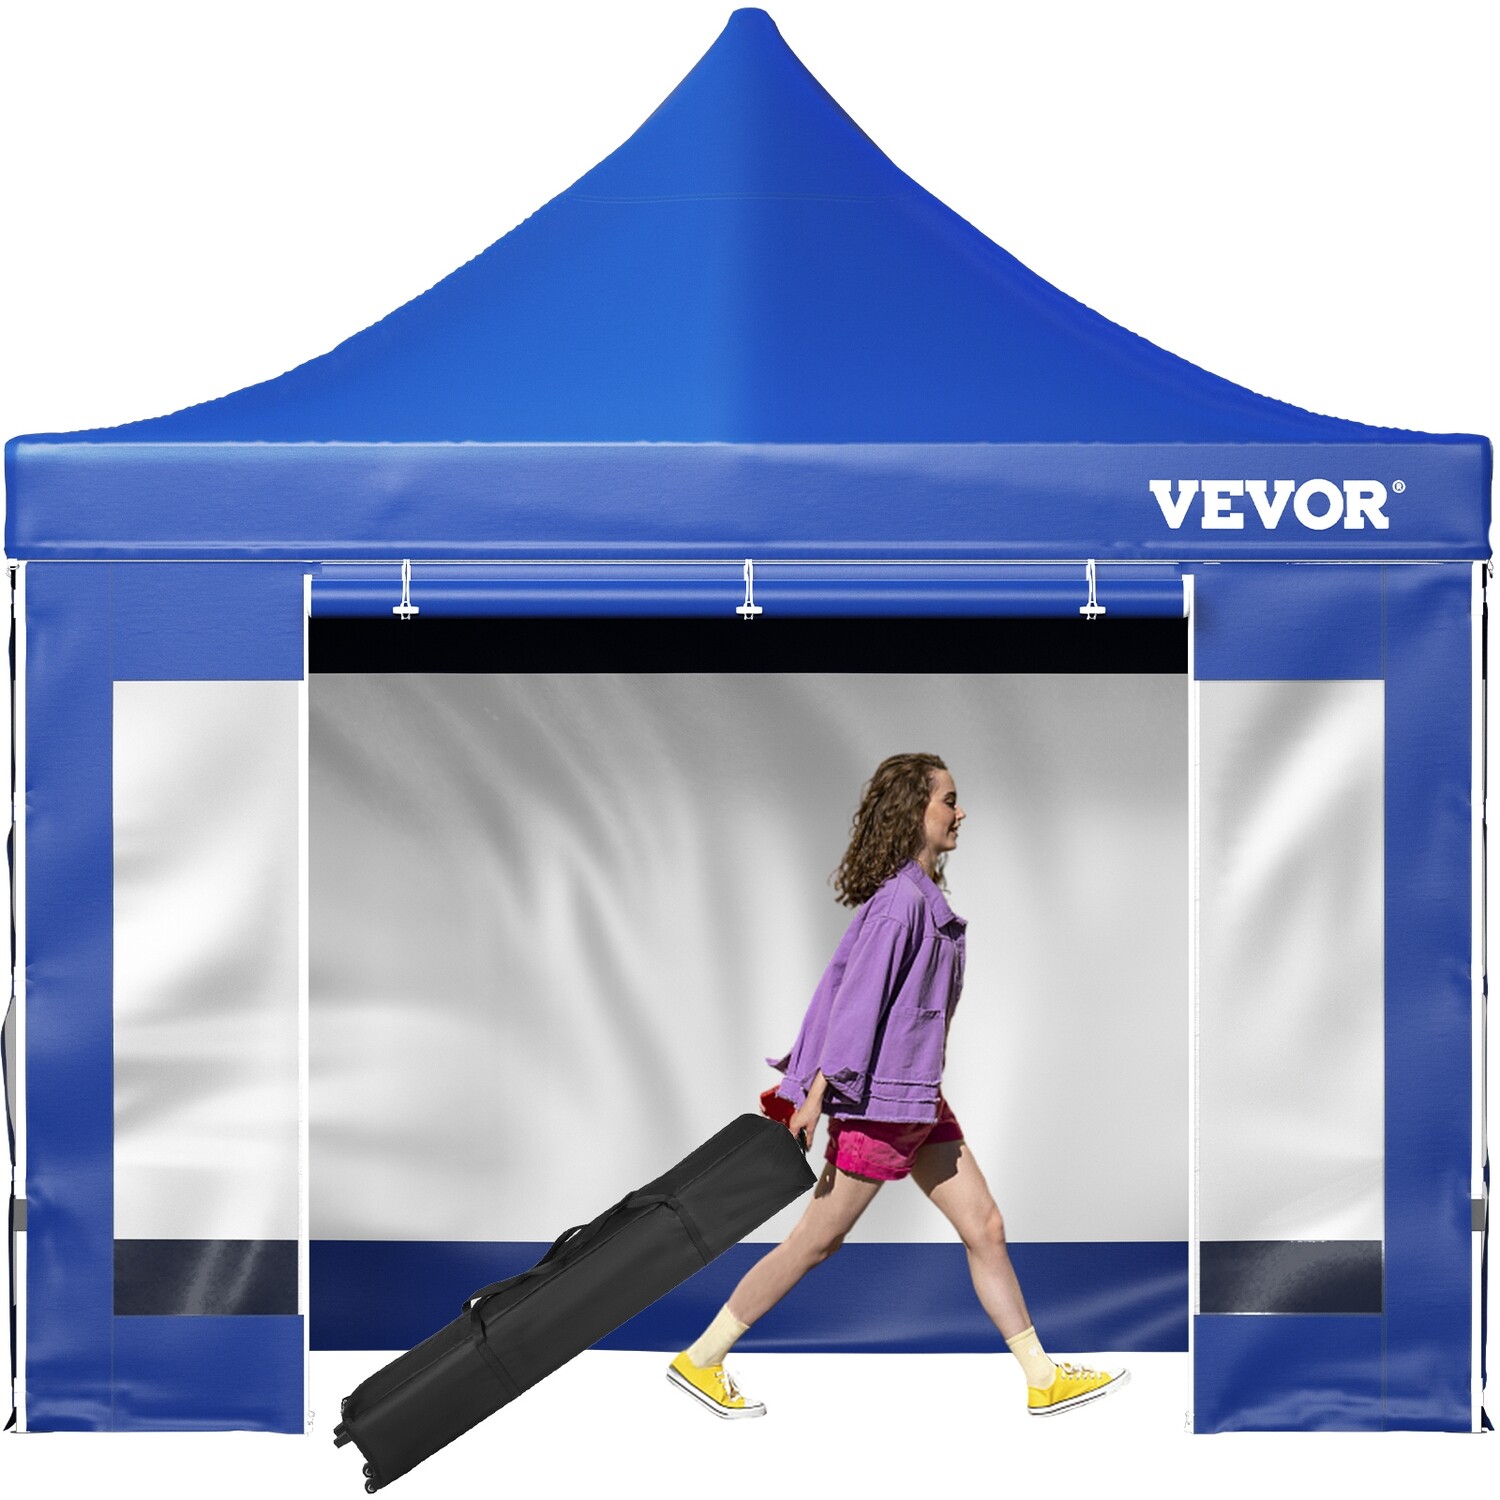 Outdoor Gazebo Tent Pop-Up Canopy Tent 10 x 10 FT with Sidewalls Blue